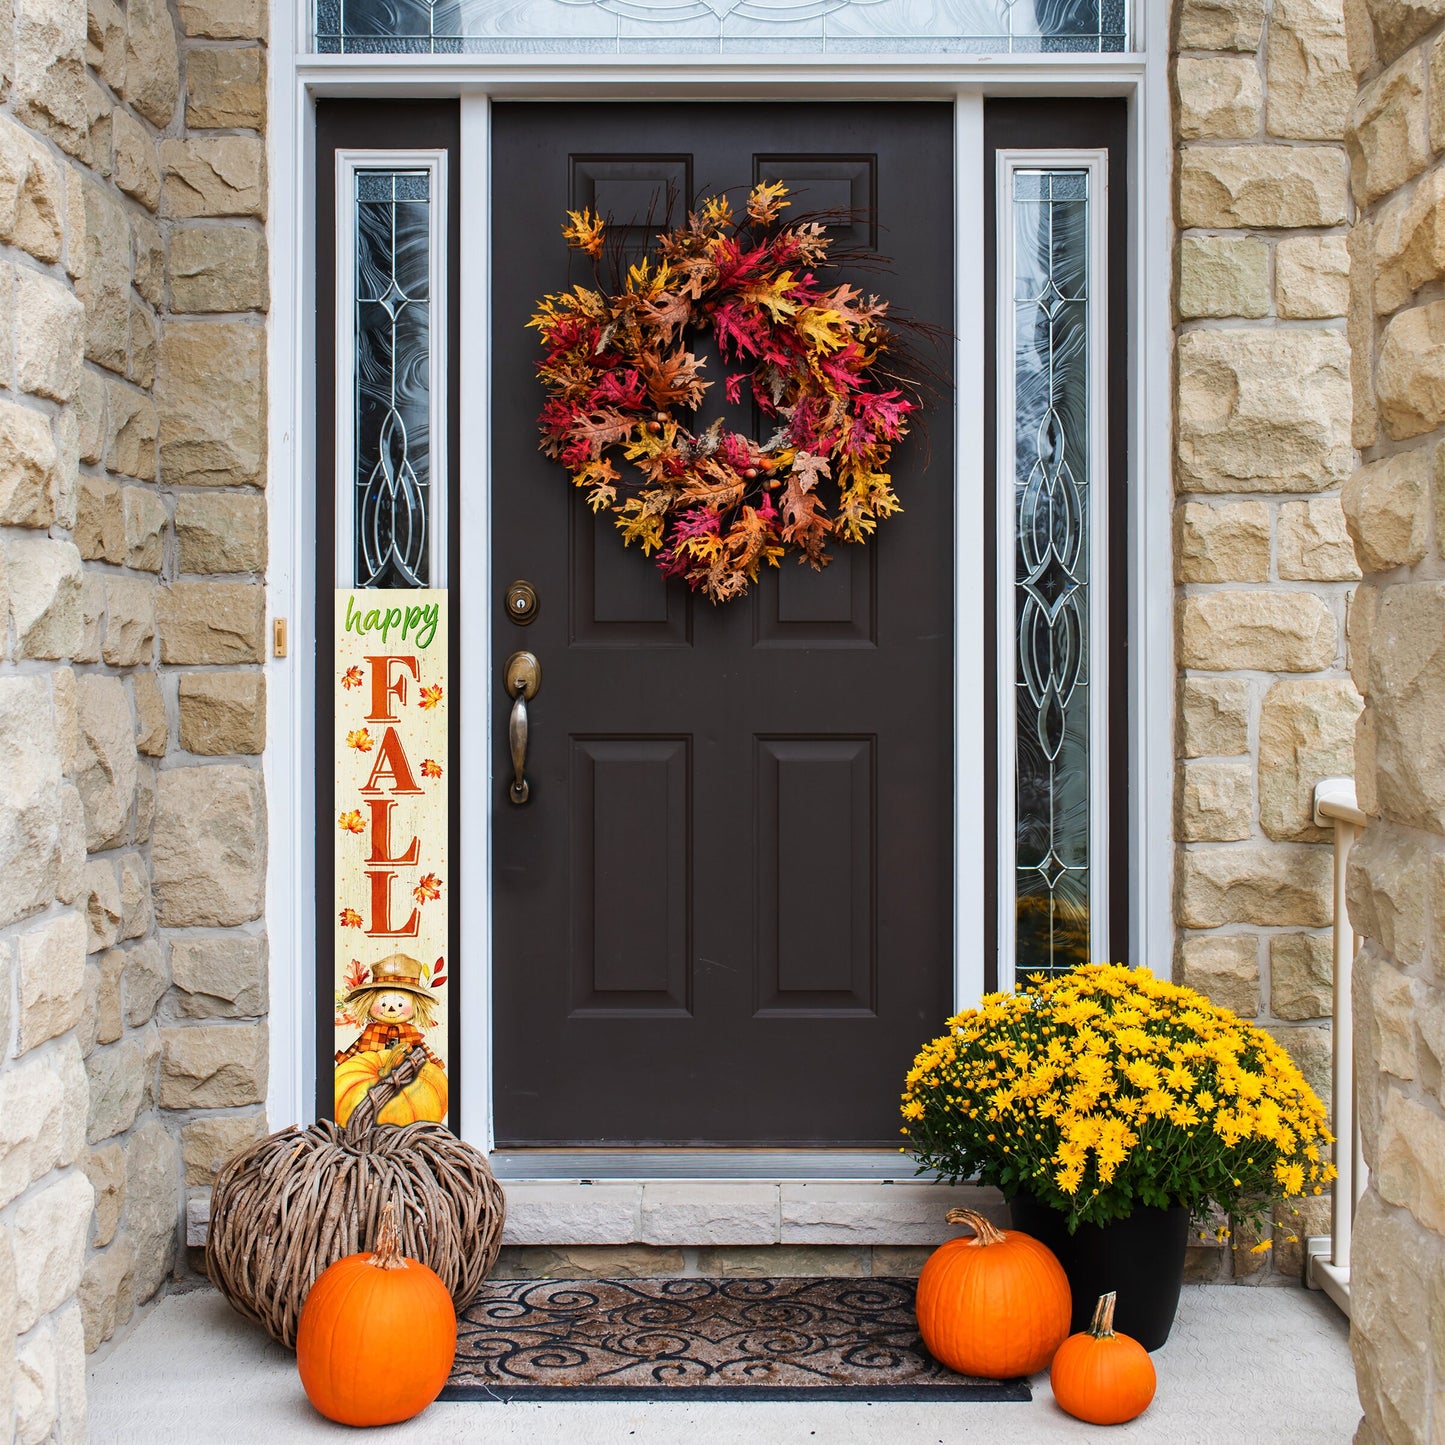 Welcome Autumn: 48in 'Happy Fall' Wooden Porch Sign with Unique Scarecrow Design - Perfect Seasonal Decor for Your Front Door or Porch!